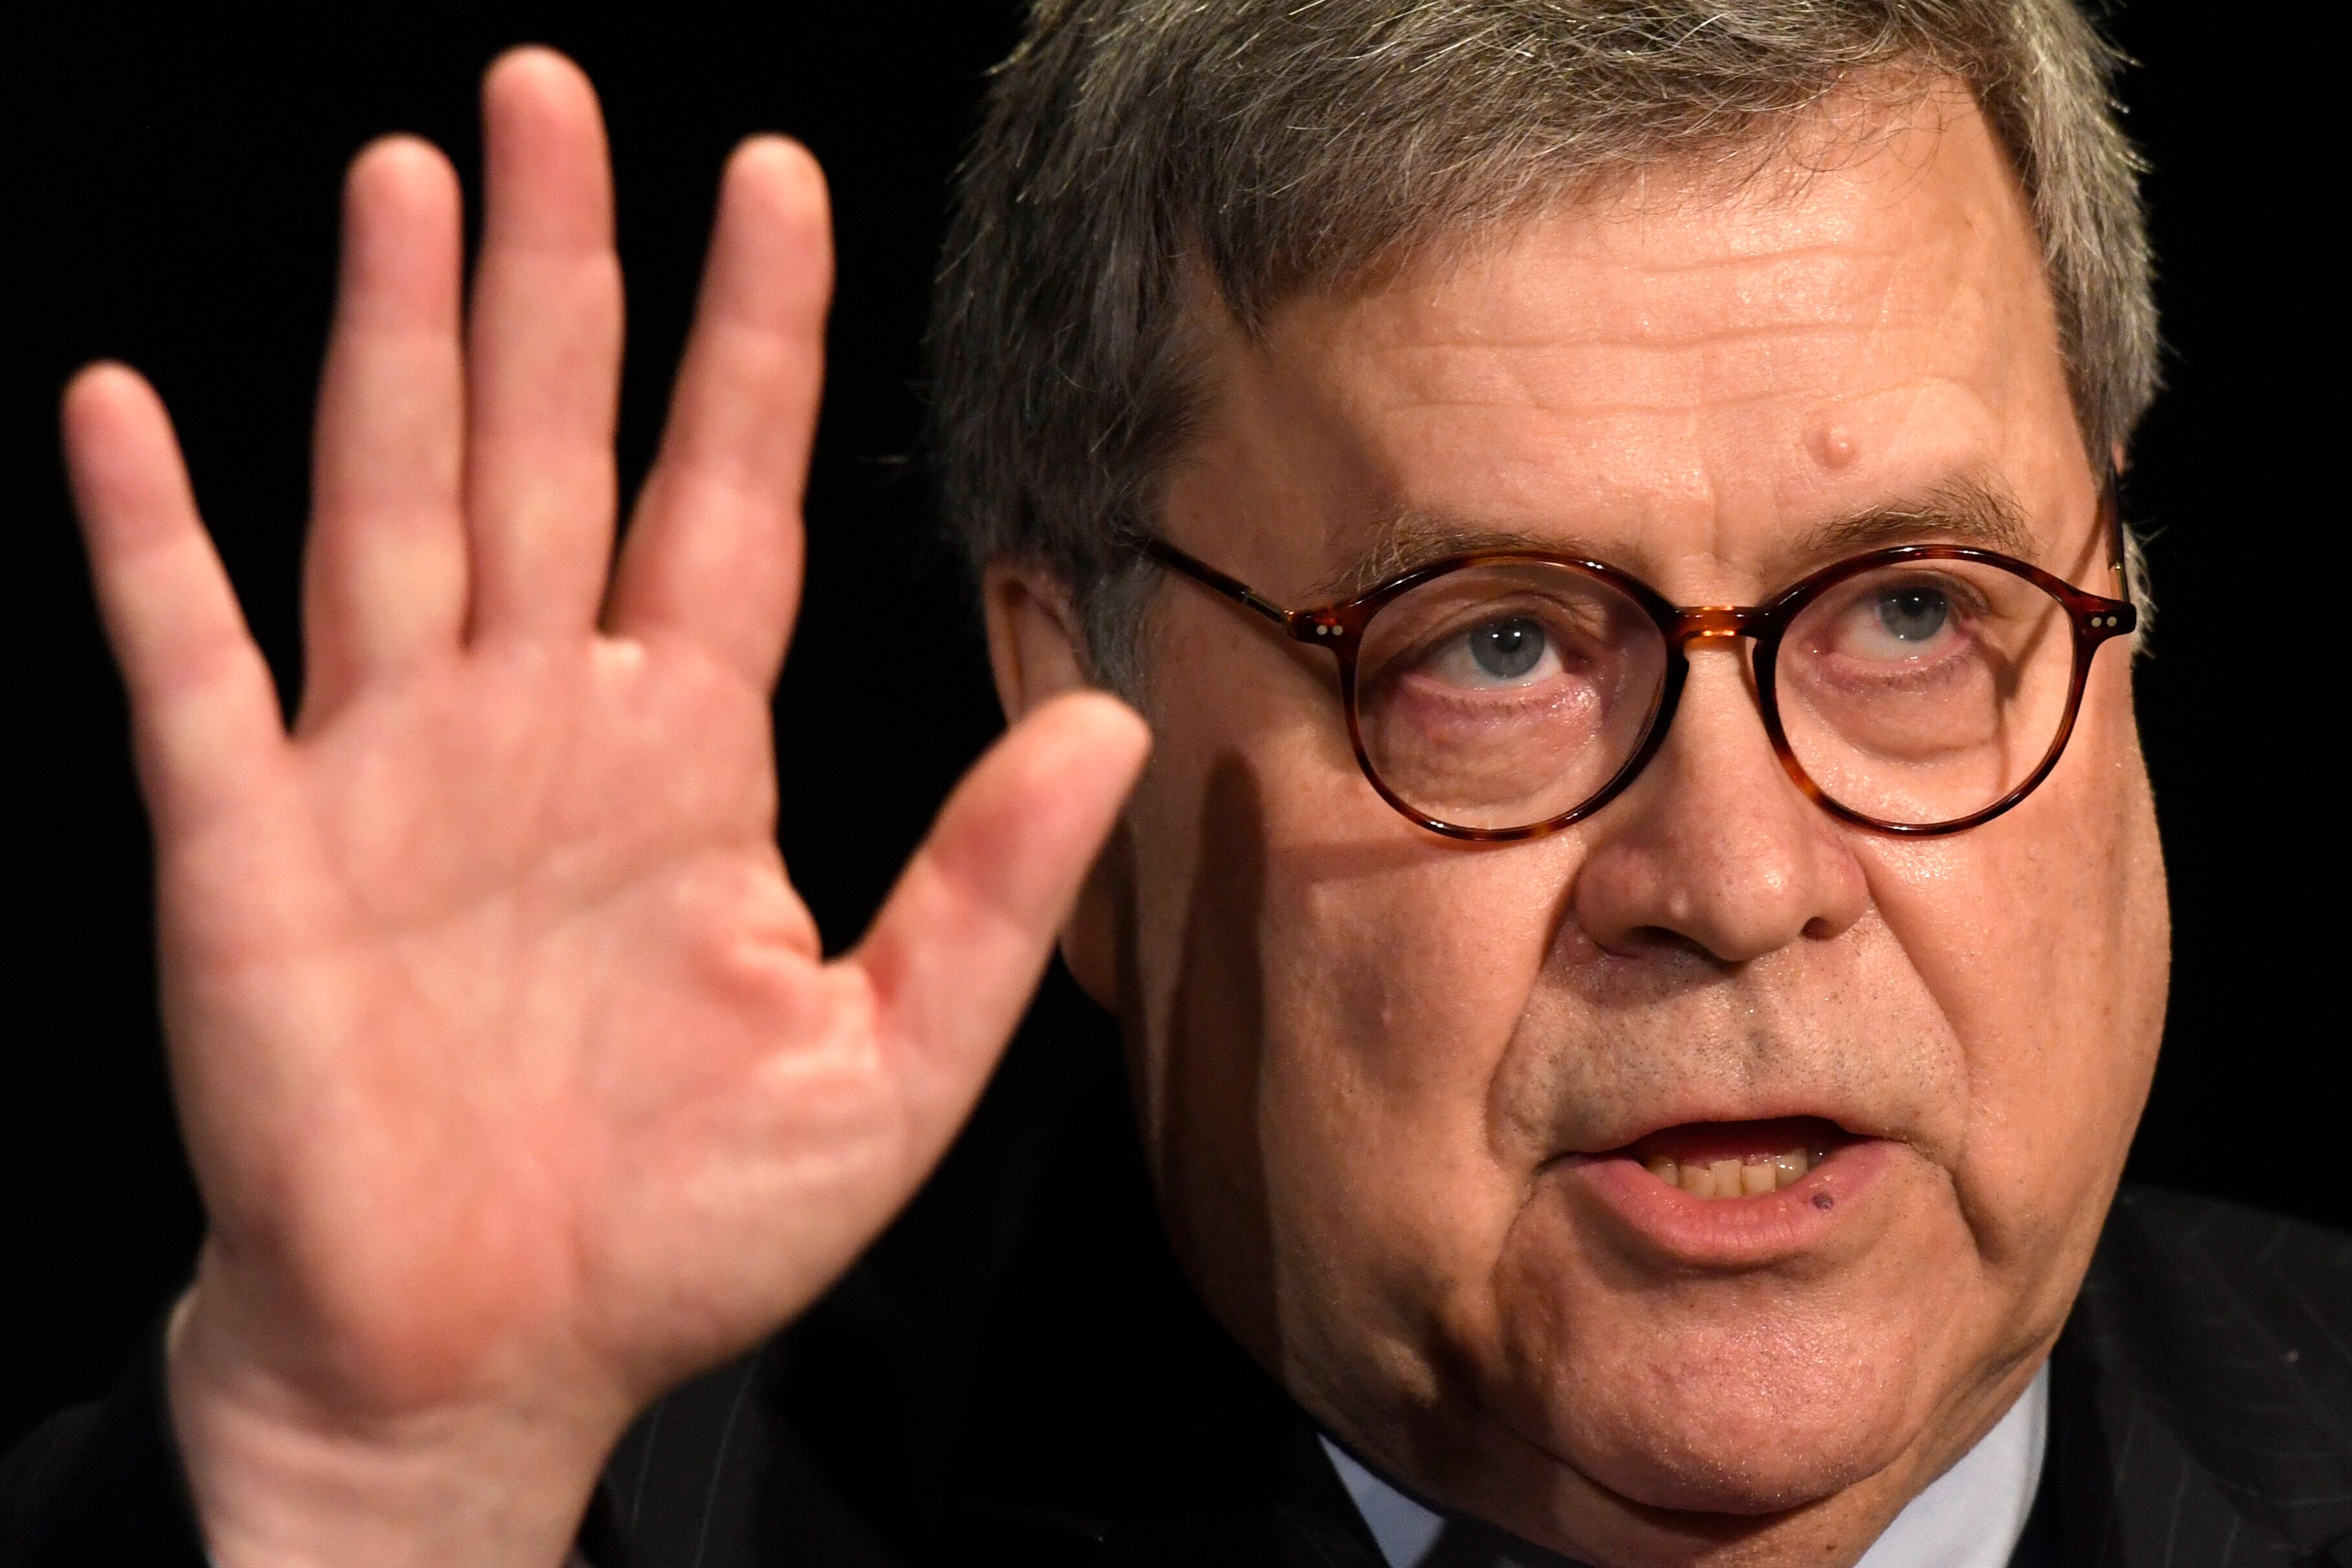 u s judges call emergency meeting over fears about william barr and trump report 1